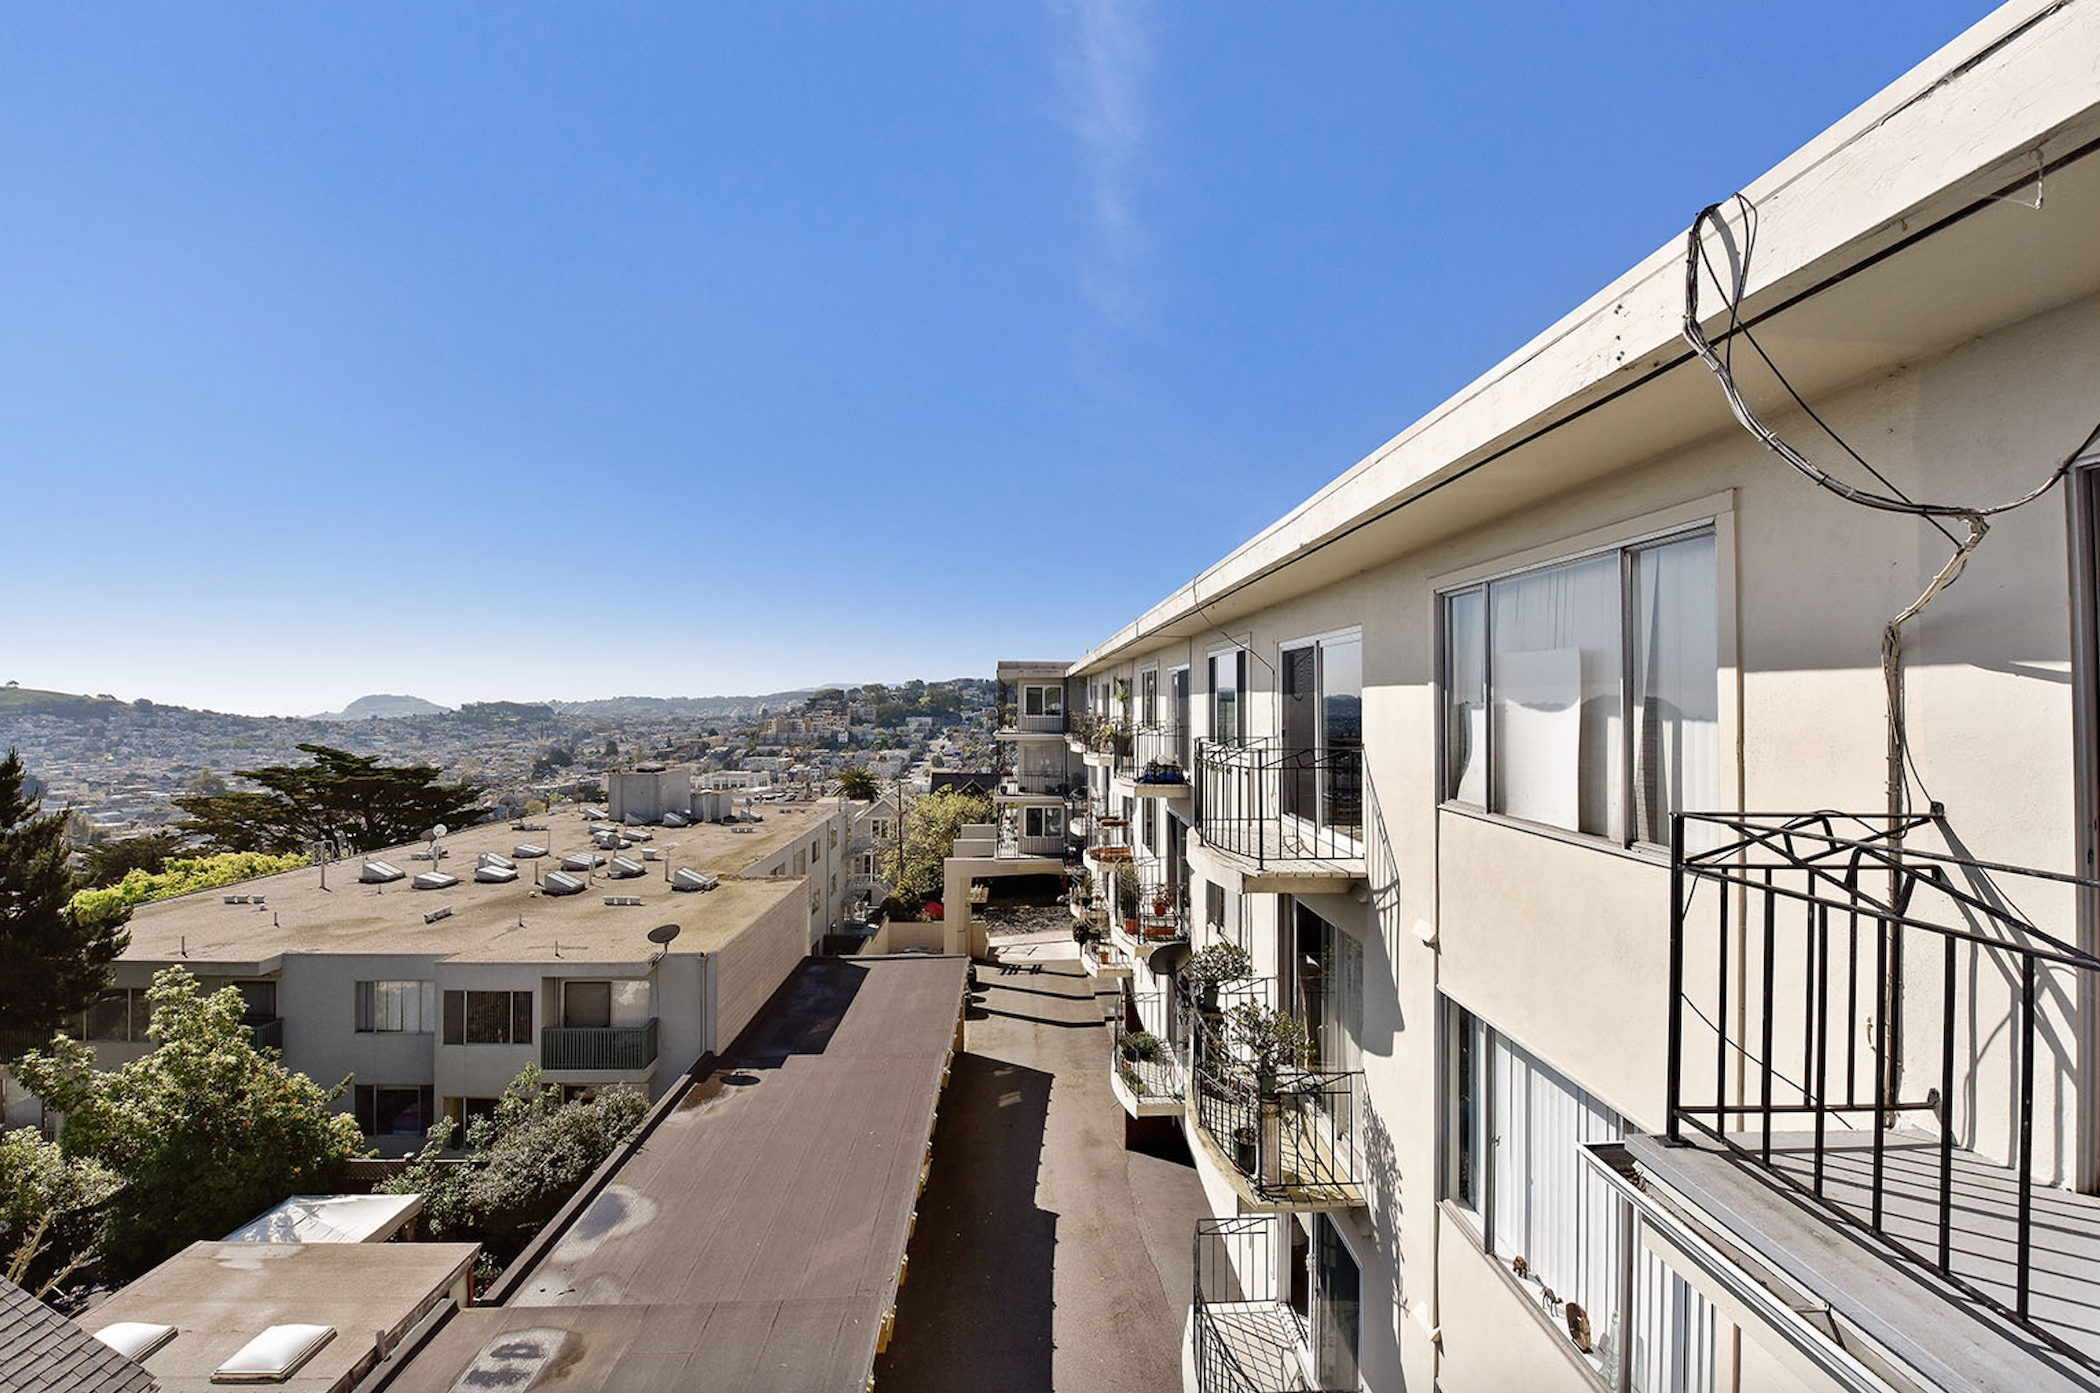 Veritas Investments owns more than 320 multifamily properties across the Bay Area and greater Los Angeles, including the 23-unit complex at 642 Alvarado St. in San Francisco. (CoStar)